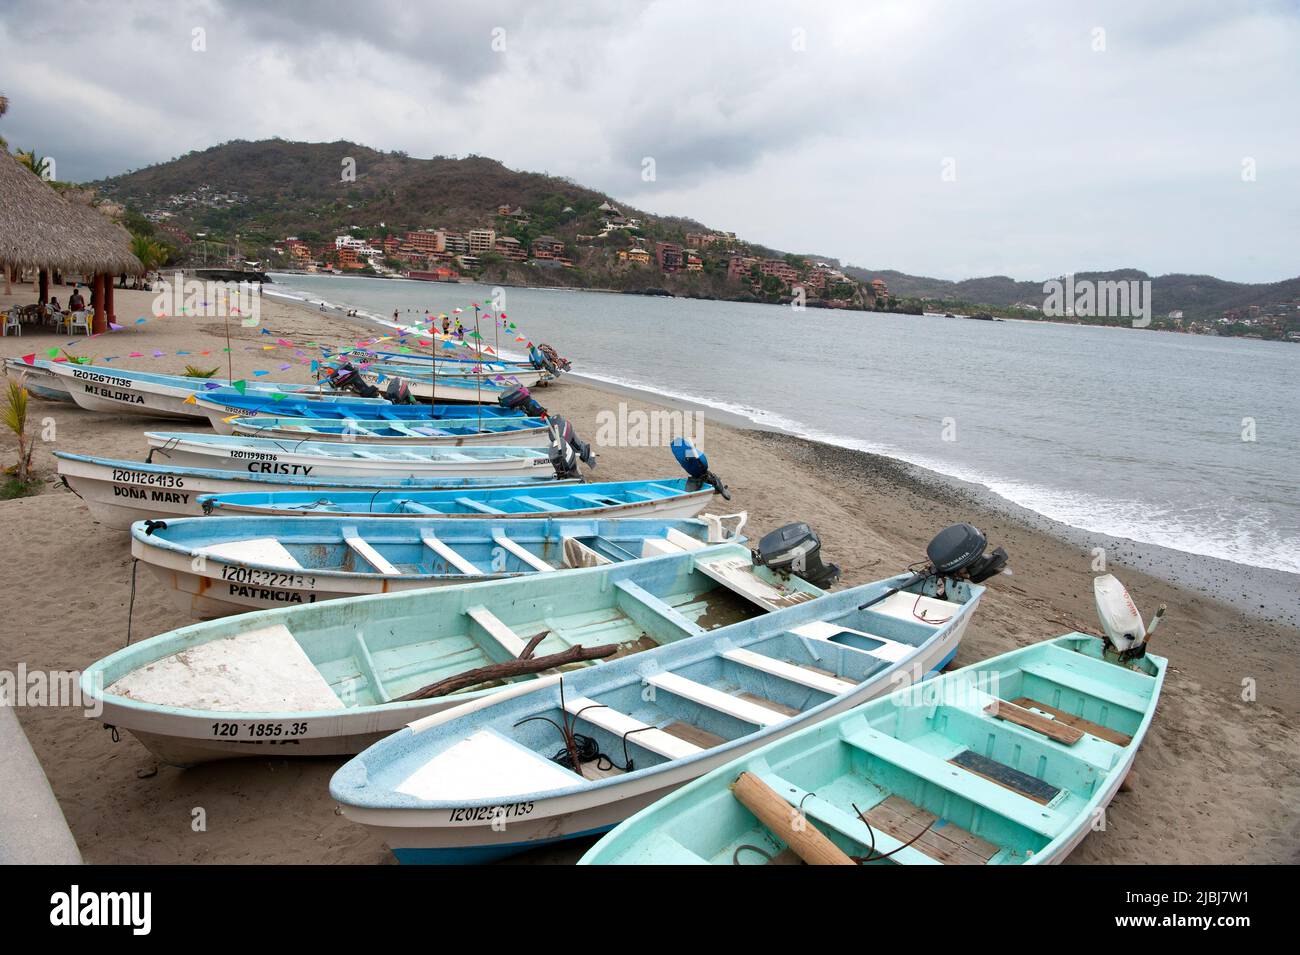 Scenic view of fishing boats on beach with palm trees and hills in Zihuatanejo, Mexico Stock Photo